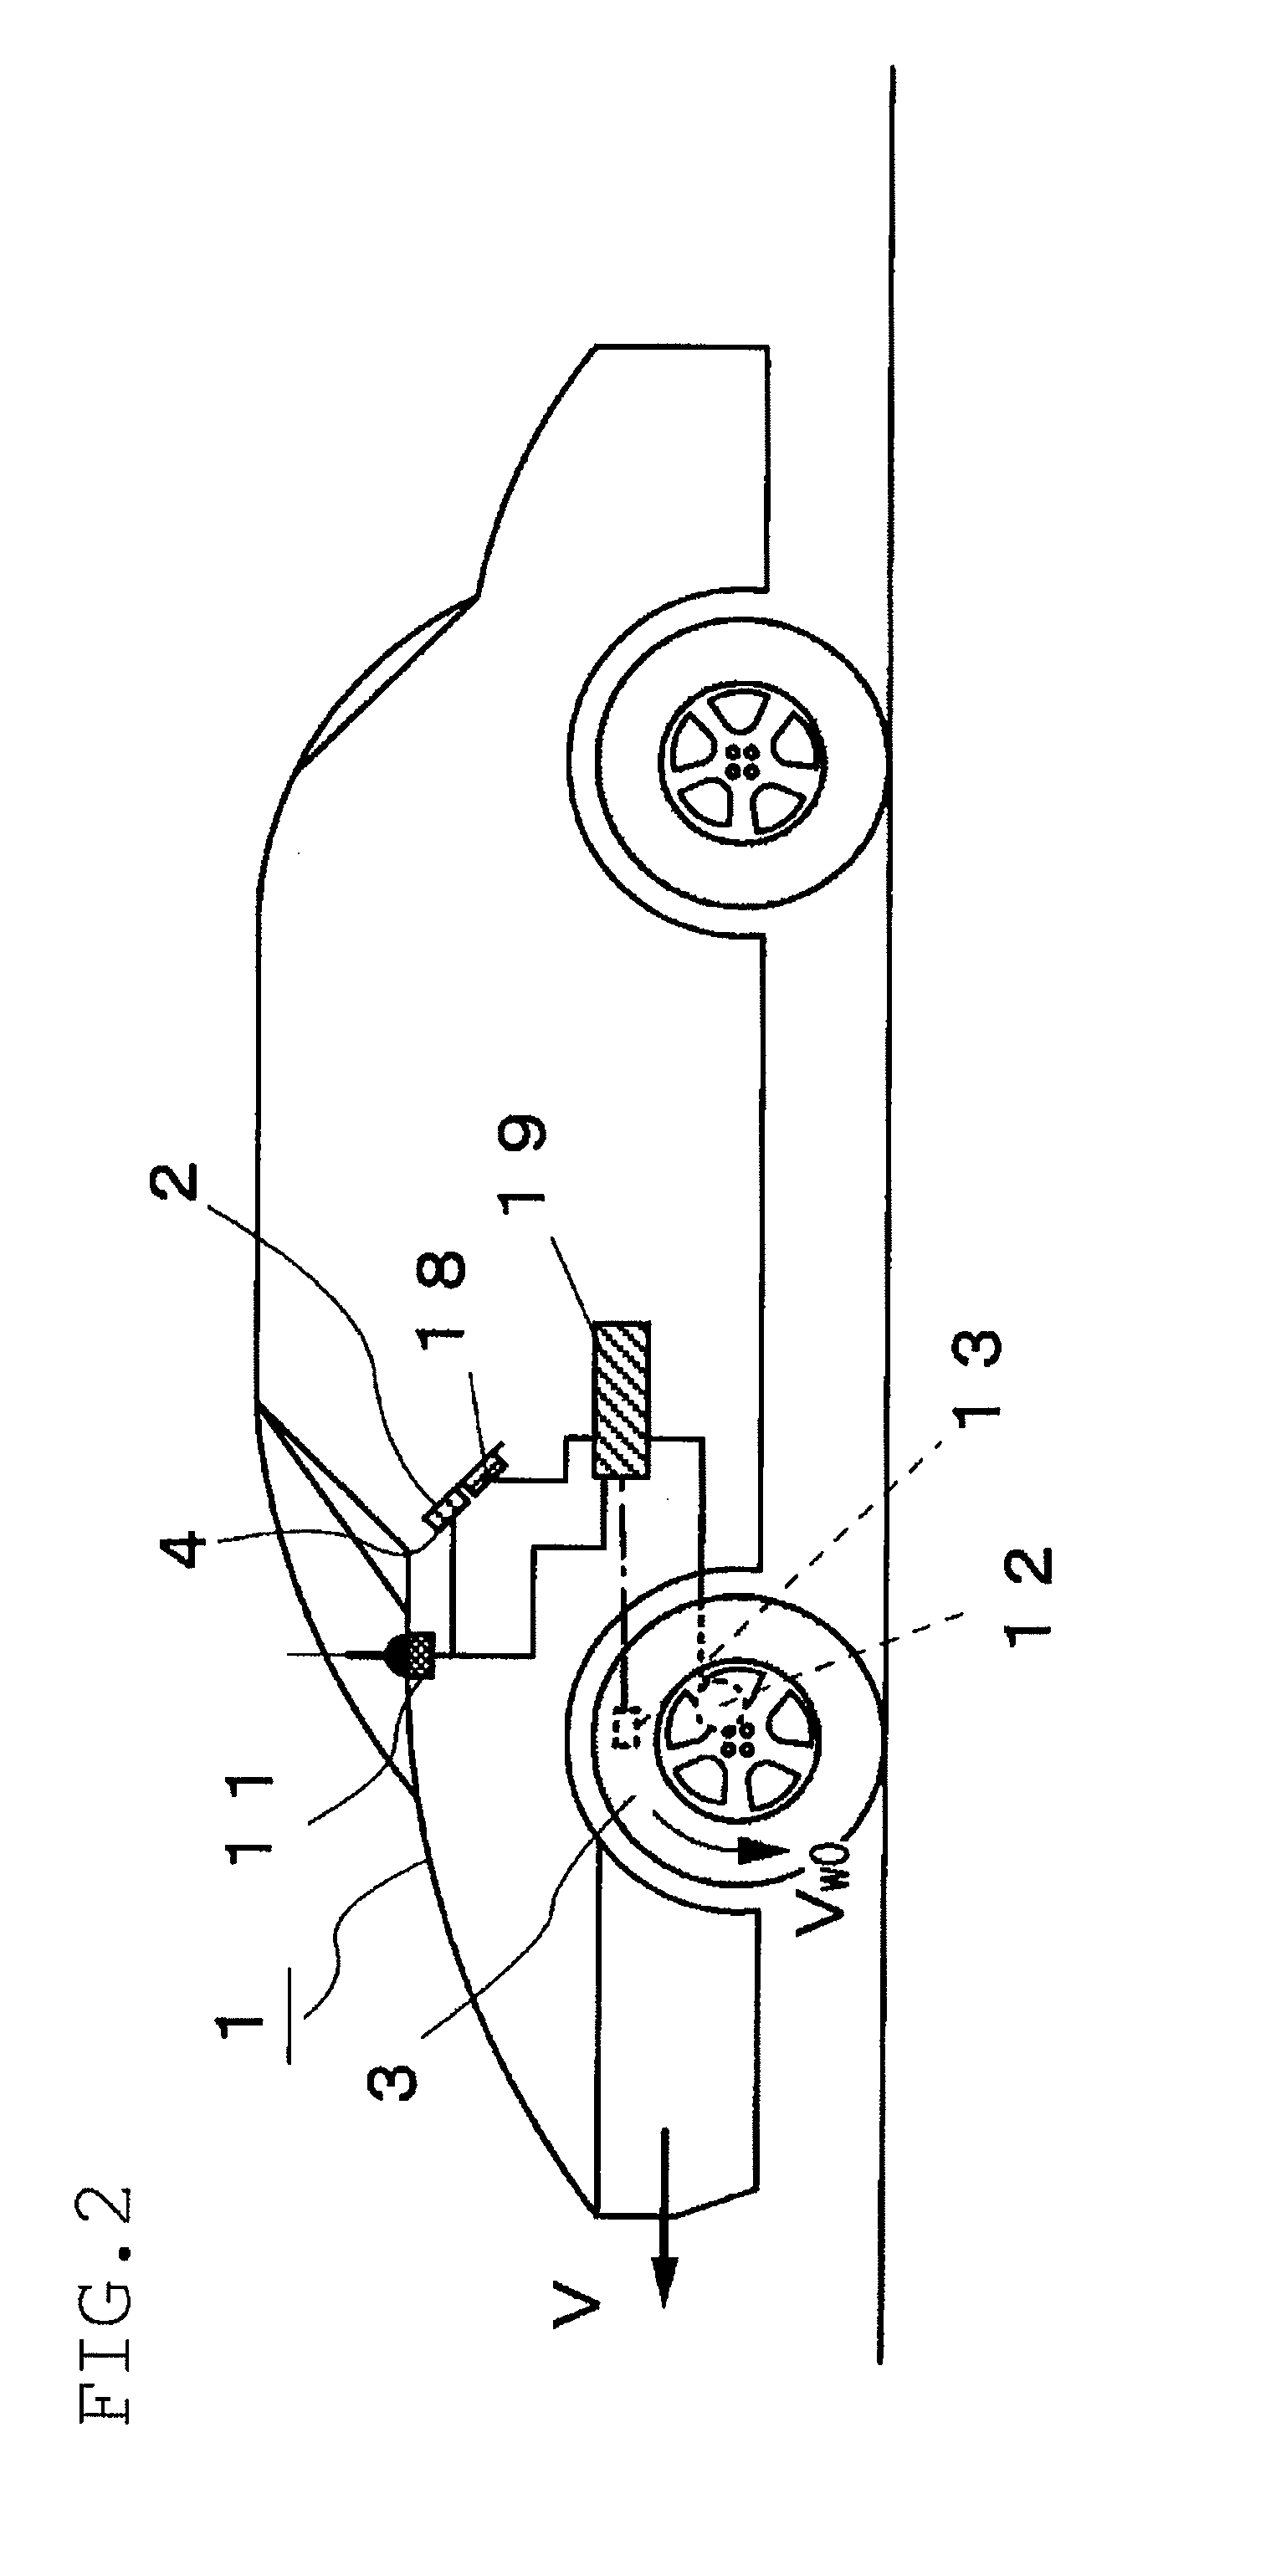 Apparatus for estimating tire wear amount and a vehicle on which the apparatus for estimating tire wear is mounted